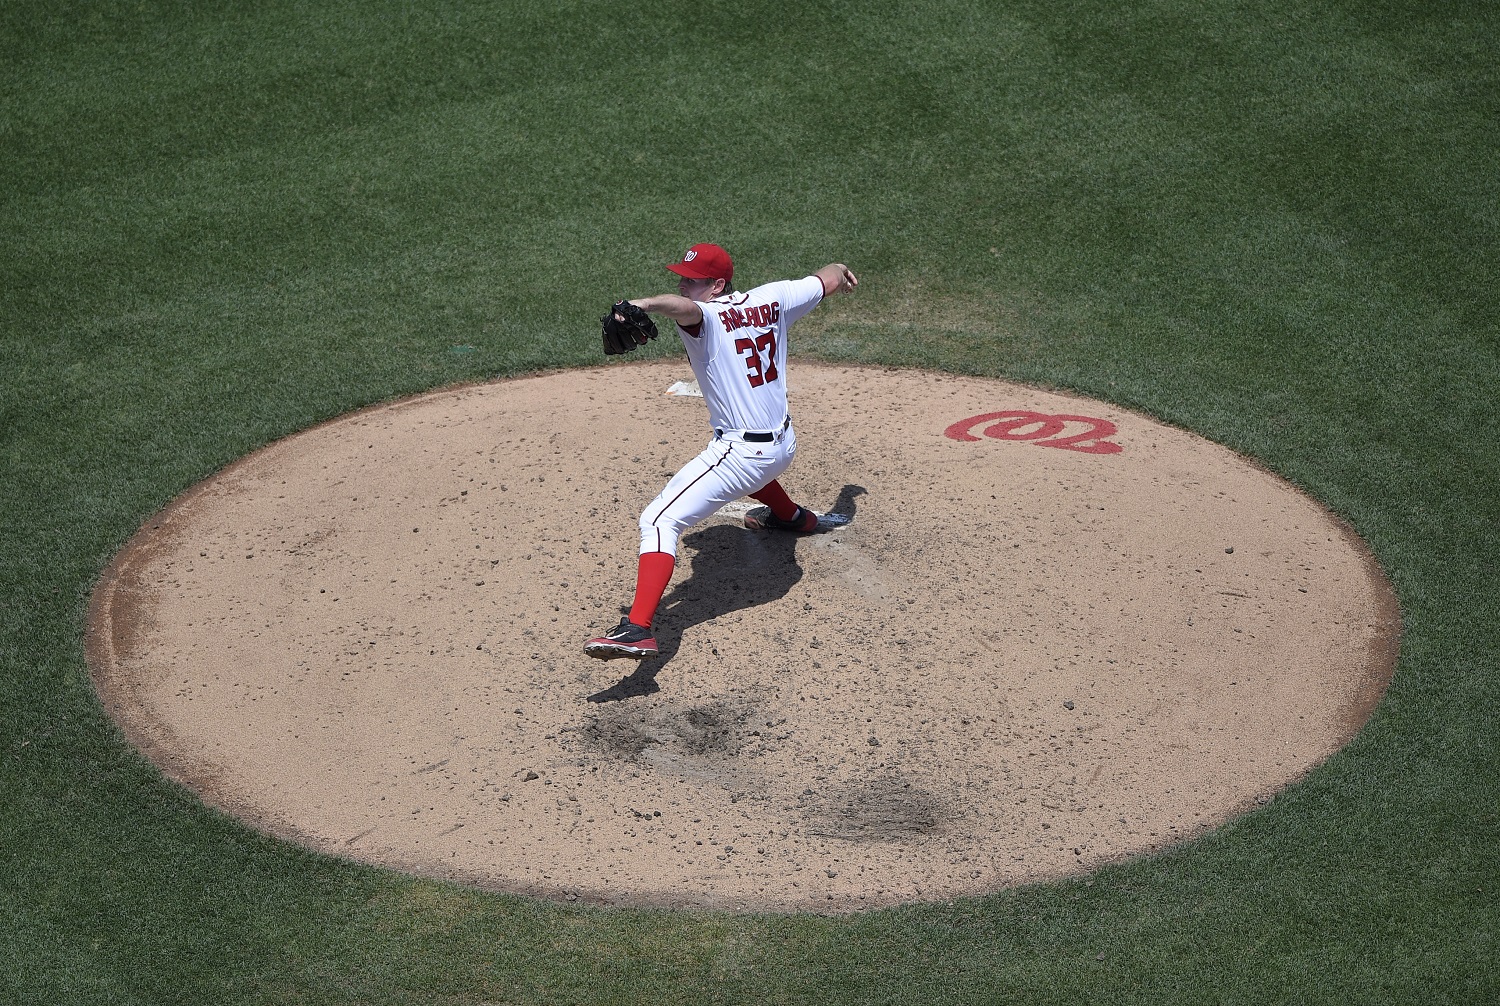 Washington Nationals starting pitcher Stephen Strasburg delivers a pitch during a baseball game against the Los Angeles Dodgers, Thursday, July 21, 2016, in Washington. The Dodgers won 6-3. (AP Photo/Nick Wass)